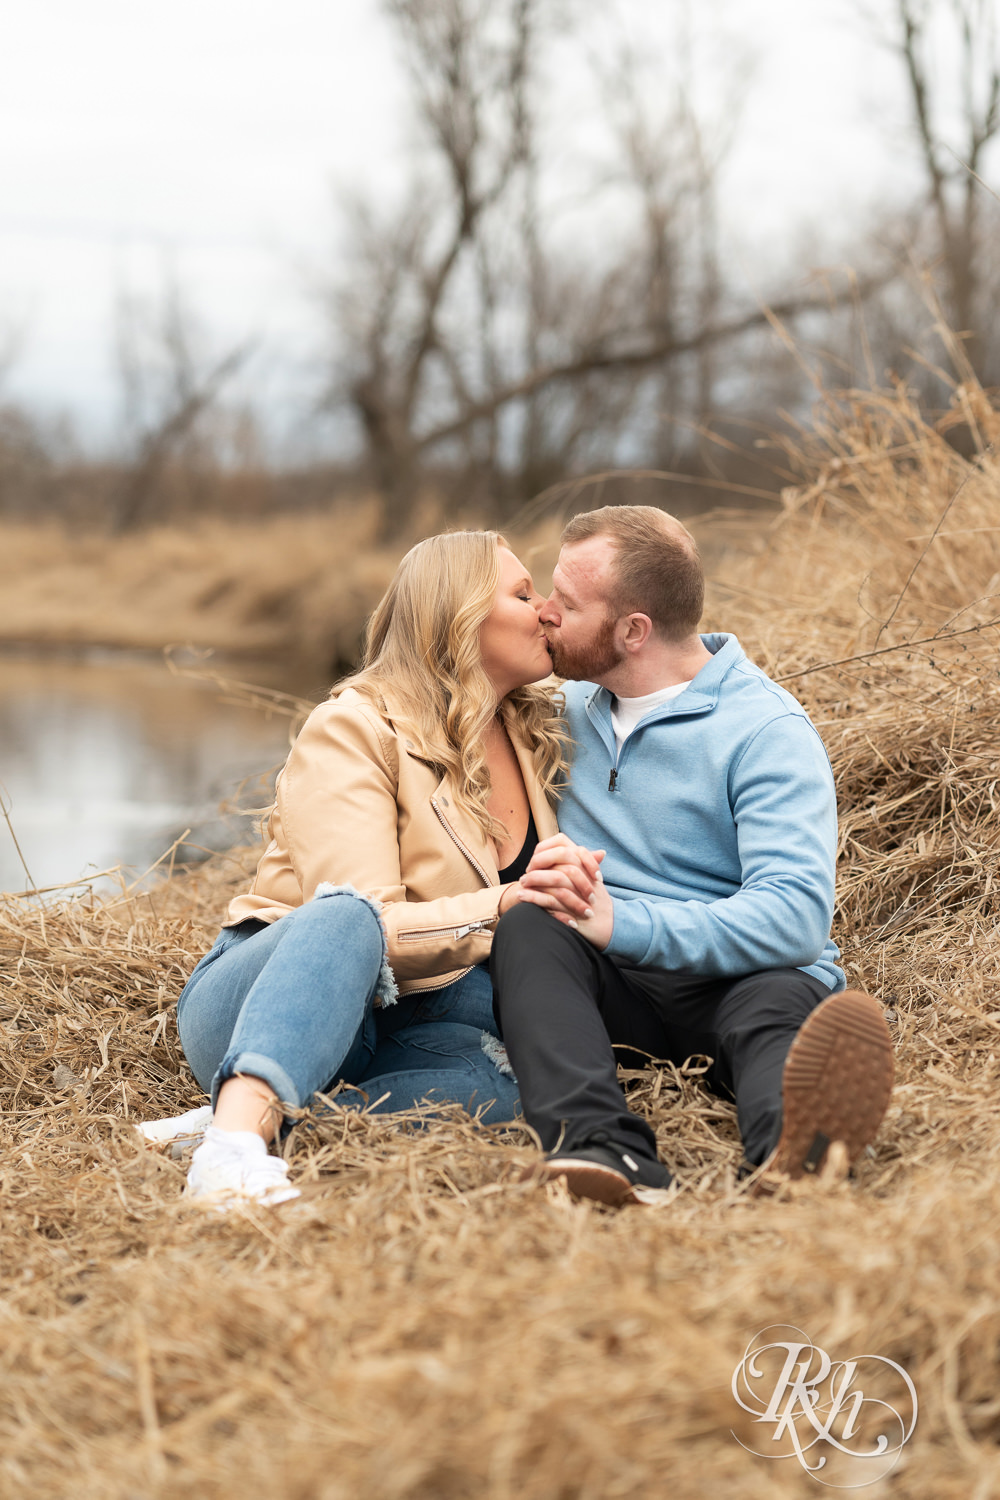 Man in blue shirt and woman in jeans kiss during engagement photography at Rice Creek Regional Trail in Shoreview, Minnesota.